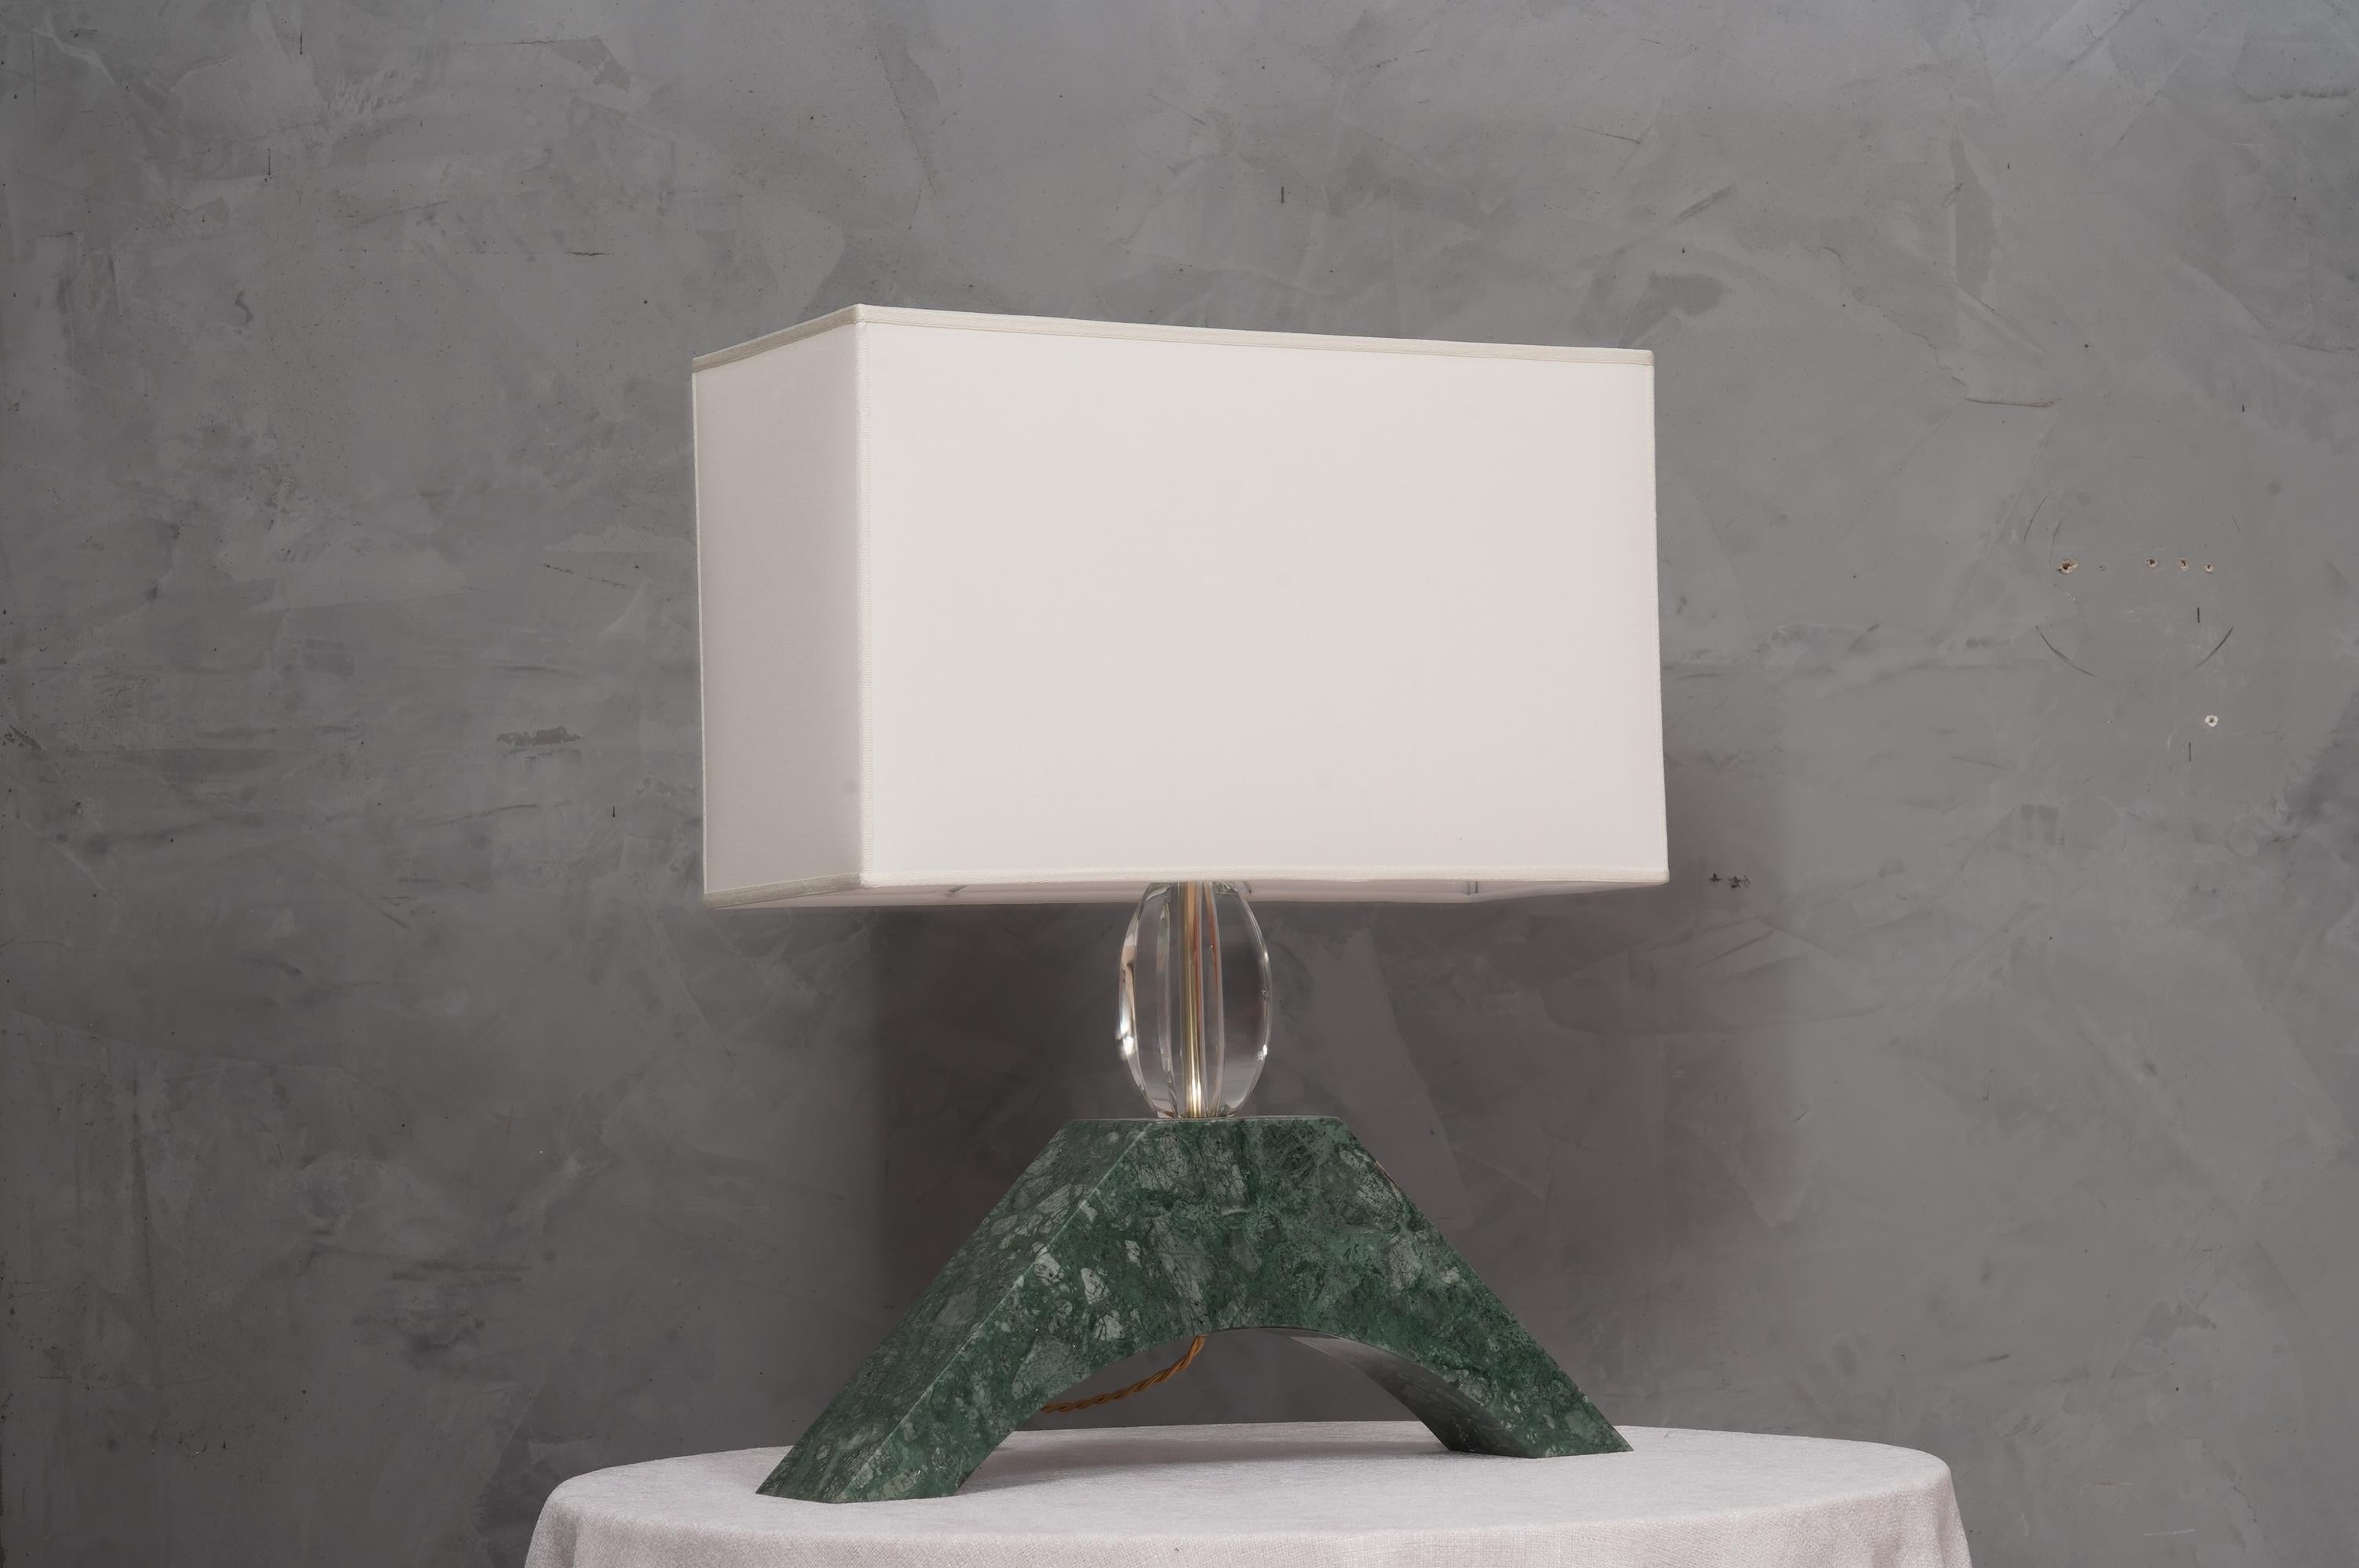 Original and characteristic table lamps in 